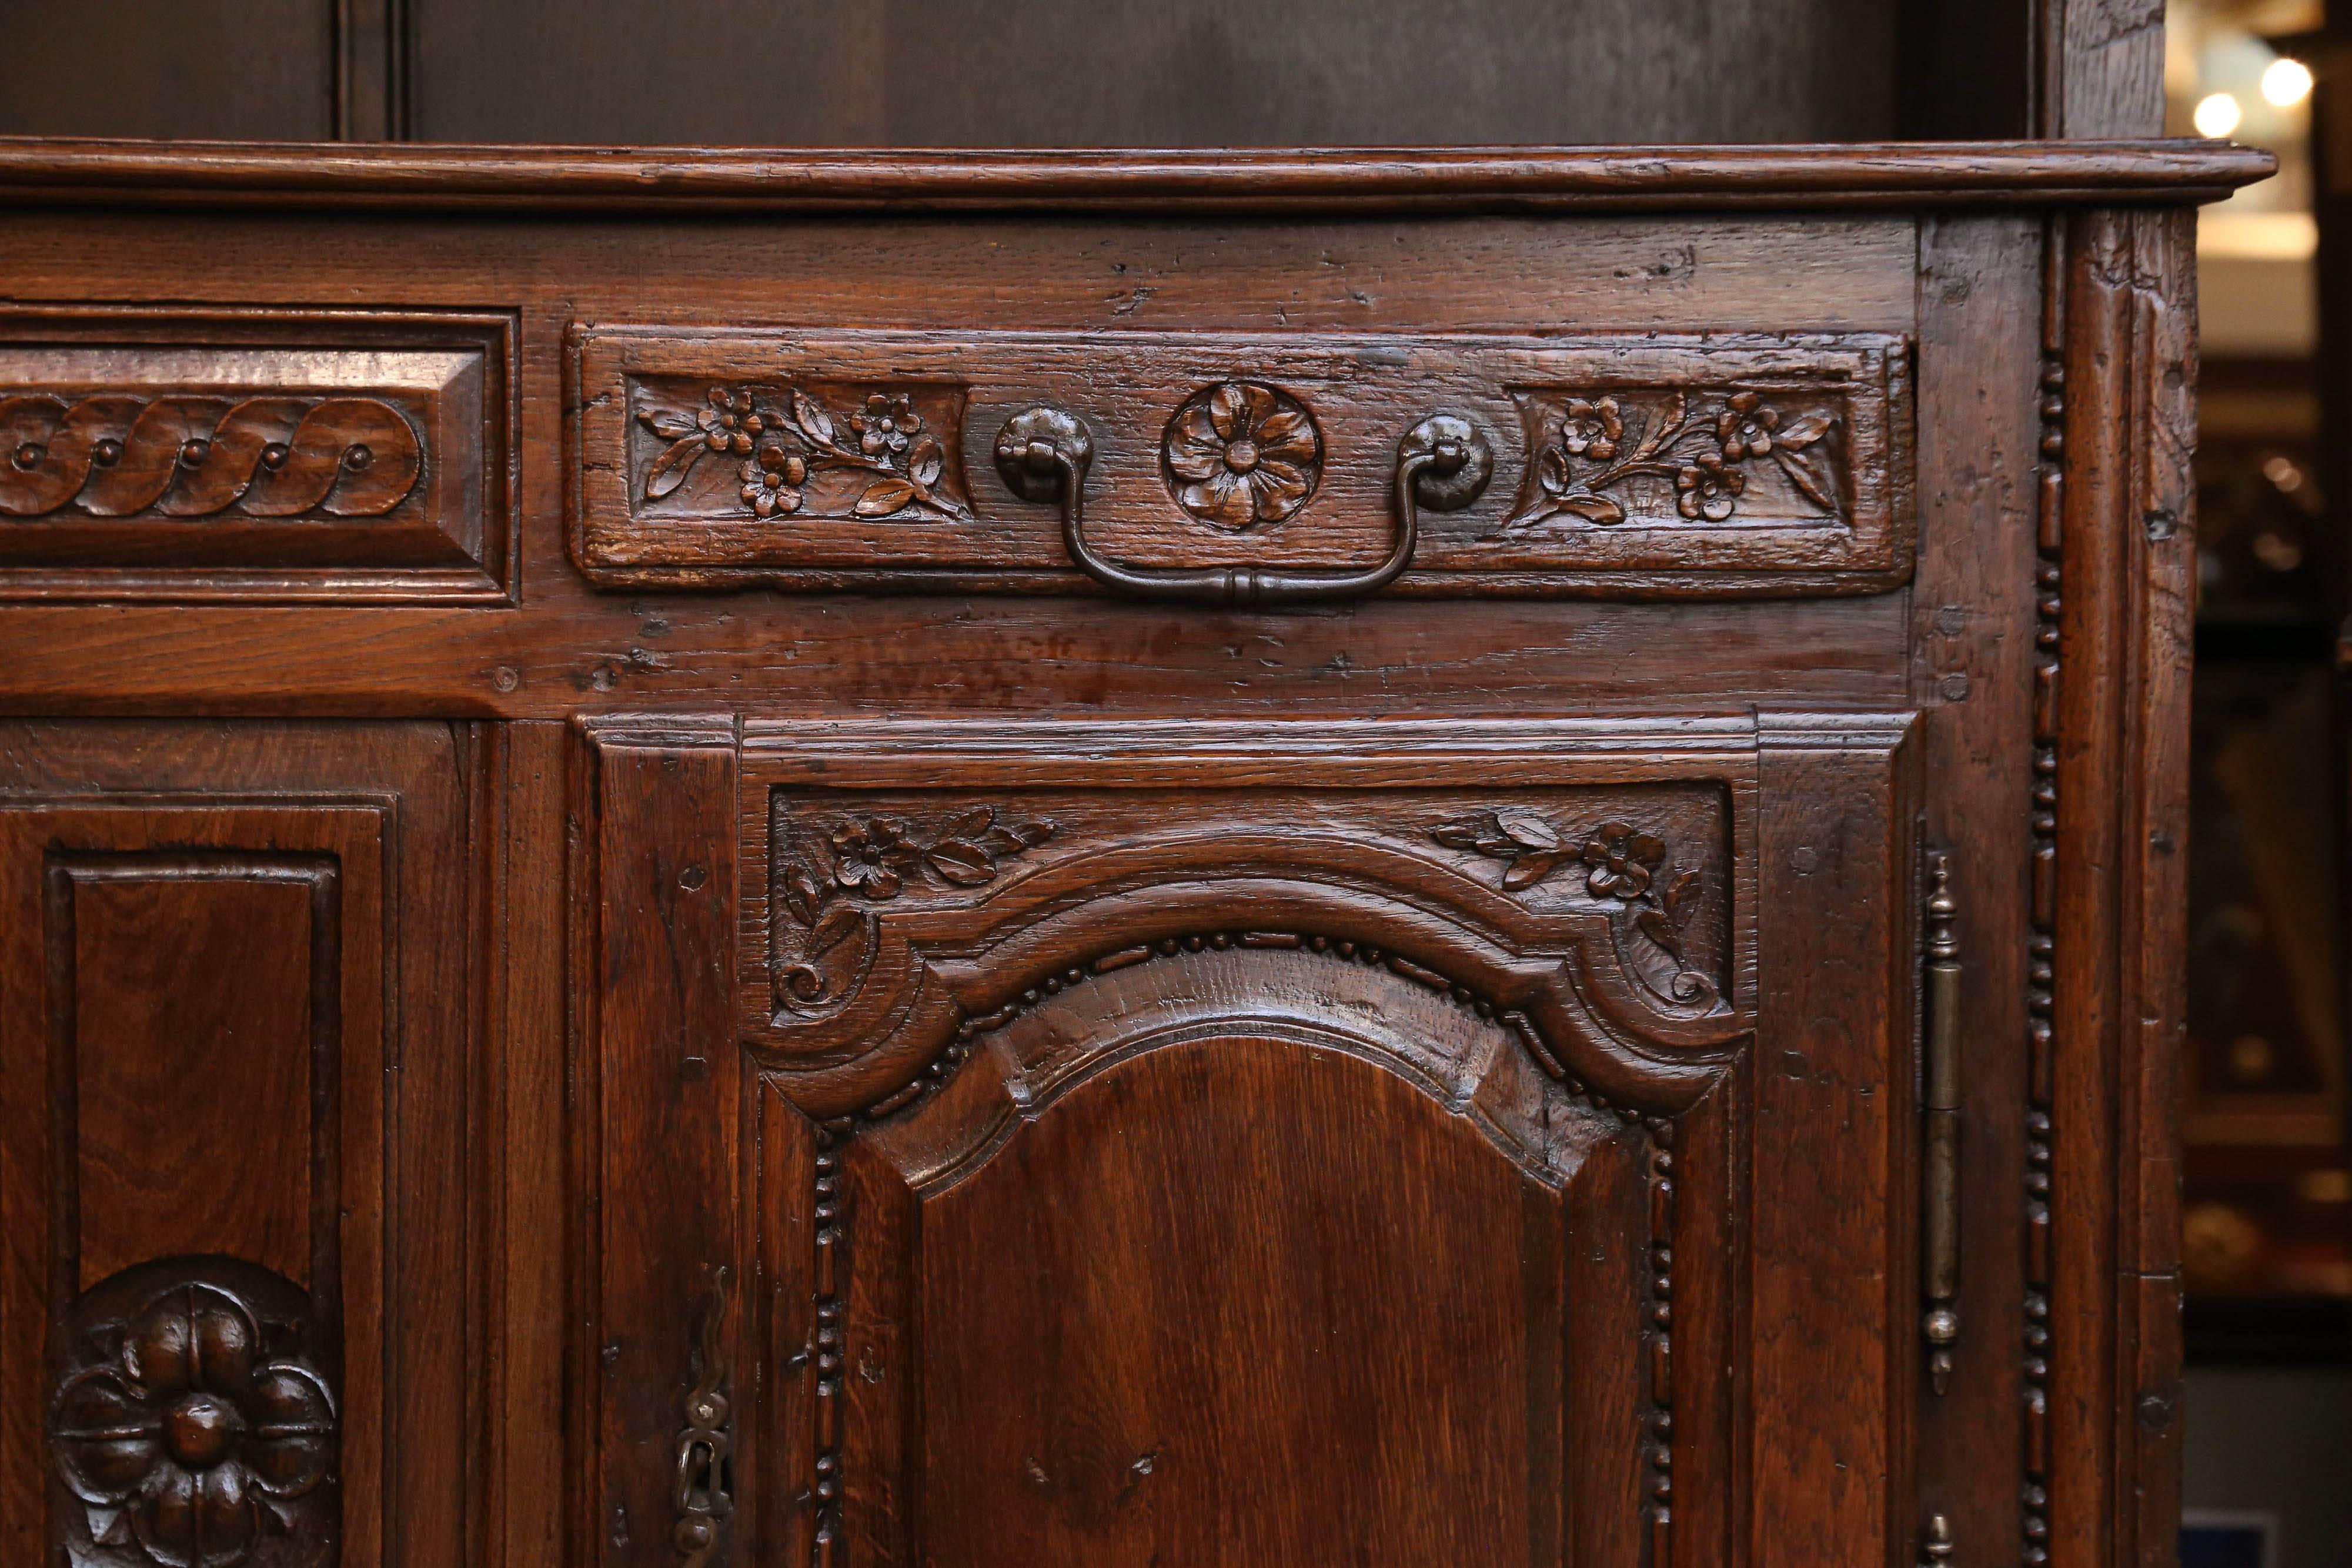 Lovely 18th century country French cupboard having two lower doors opening
to storage area. Two drawers with original hand-wrought drawer pulls are
under the upper structure which holds three addition decorative shelves
for display. Louis XV